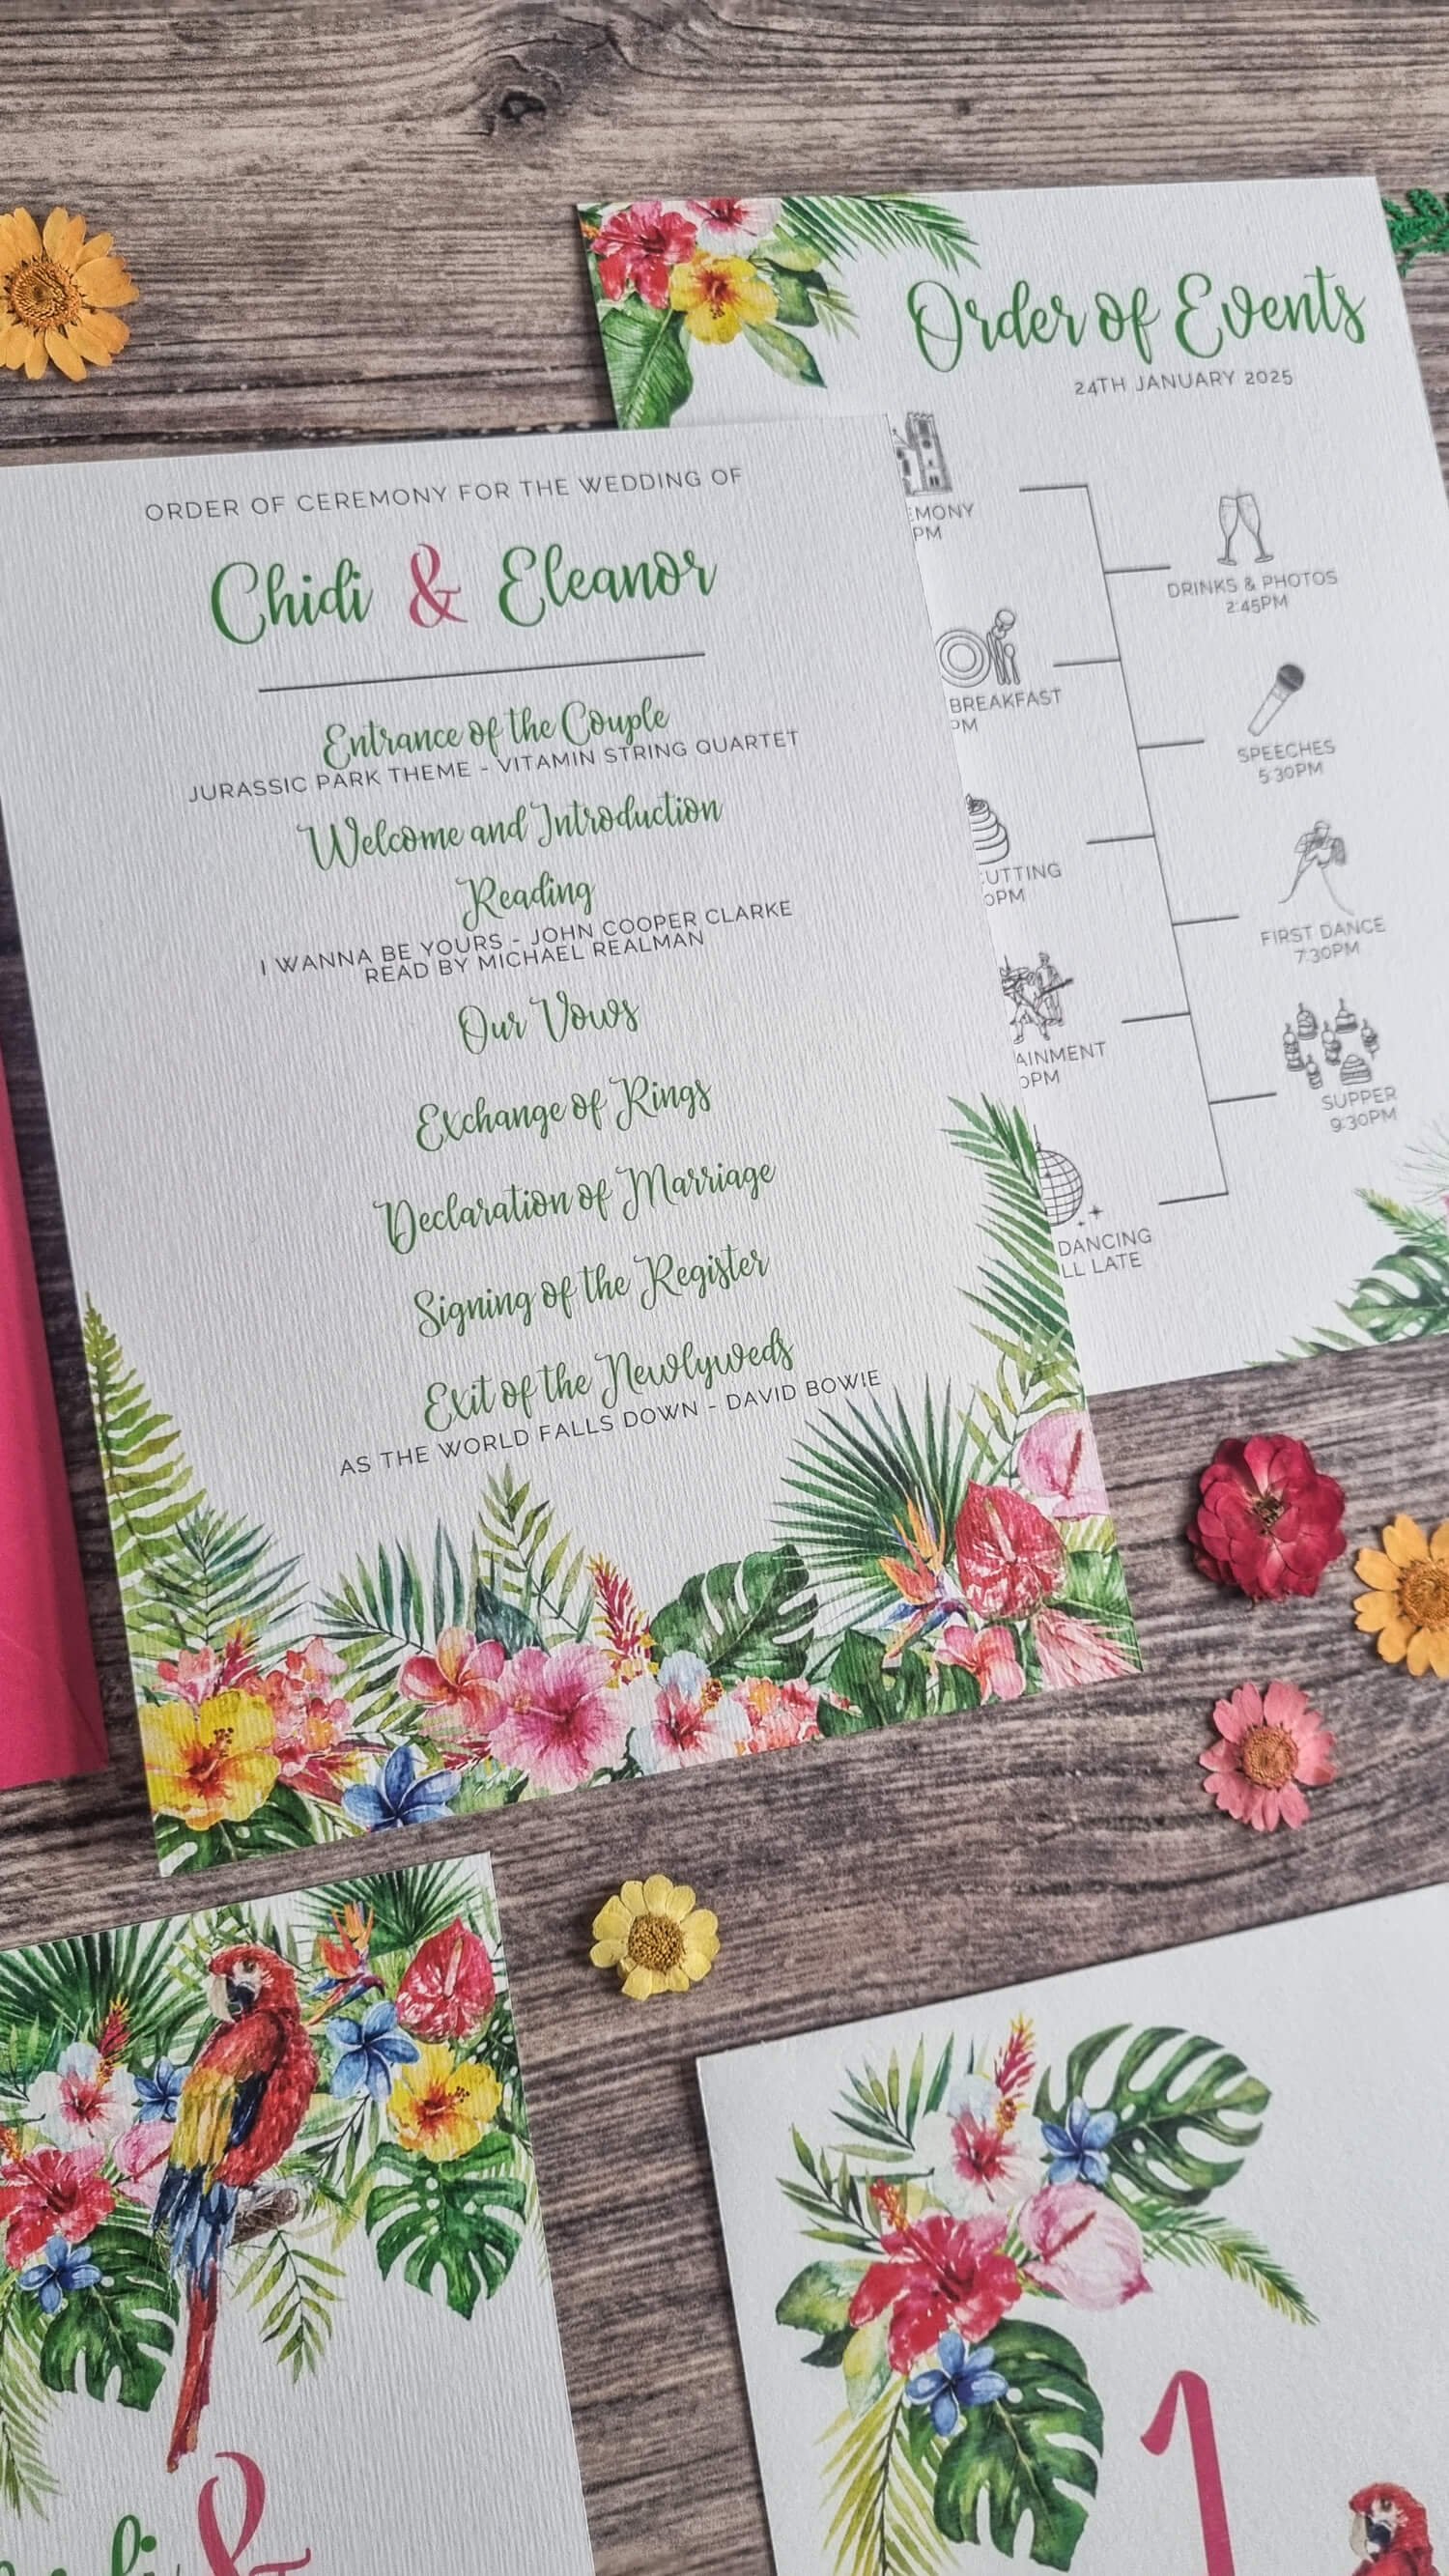 Rainforest Feathers Order of Service and Wedding Timeline